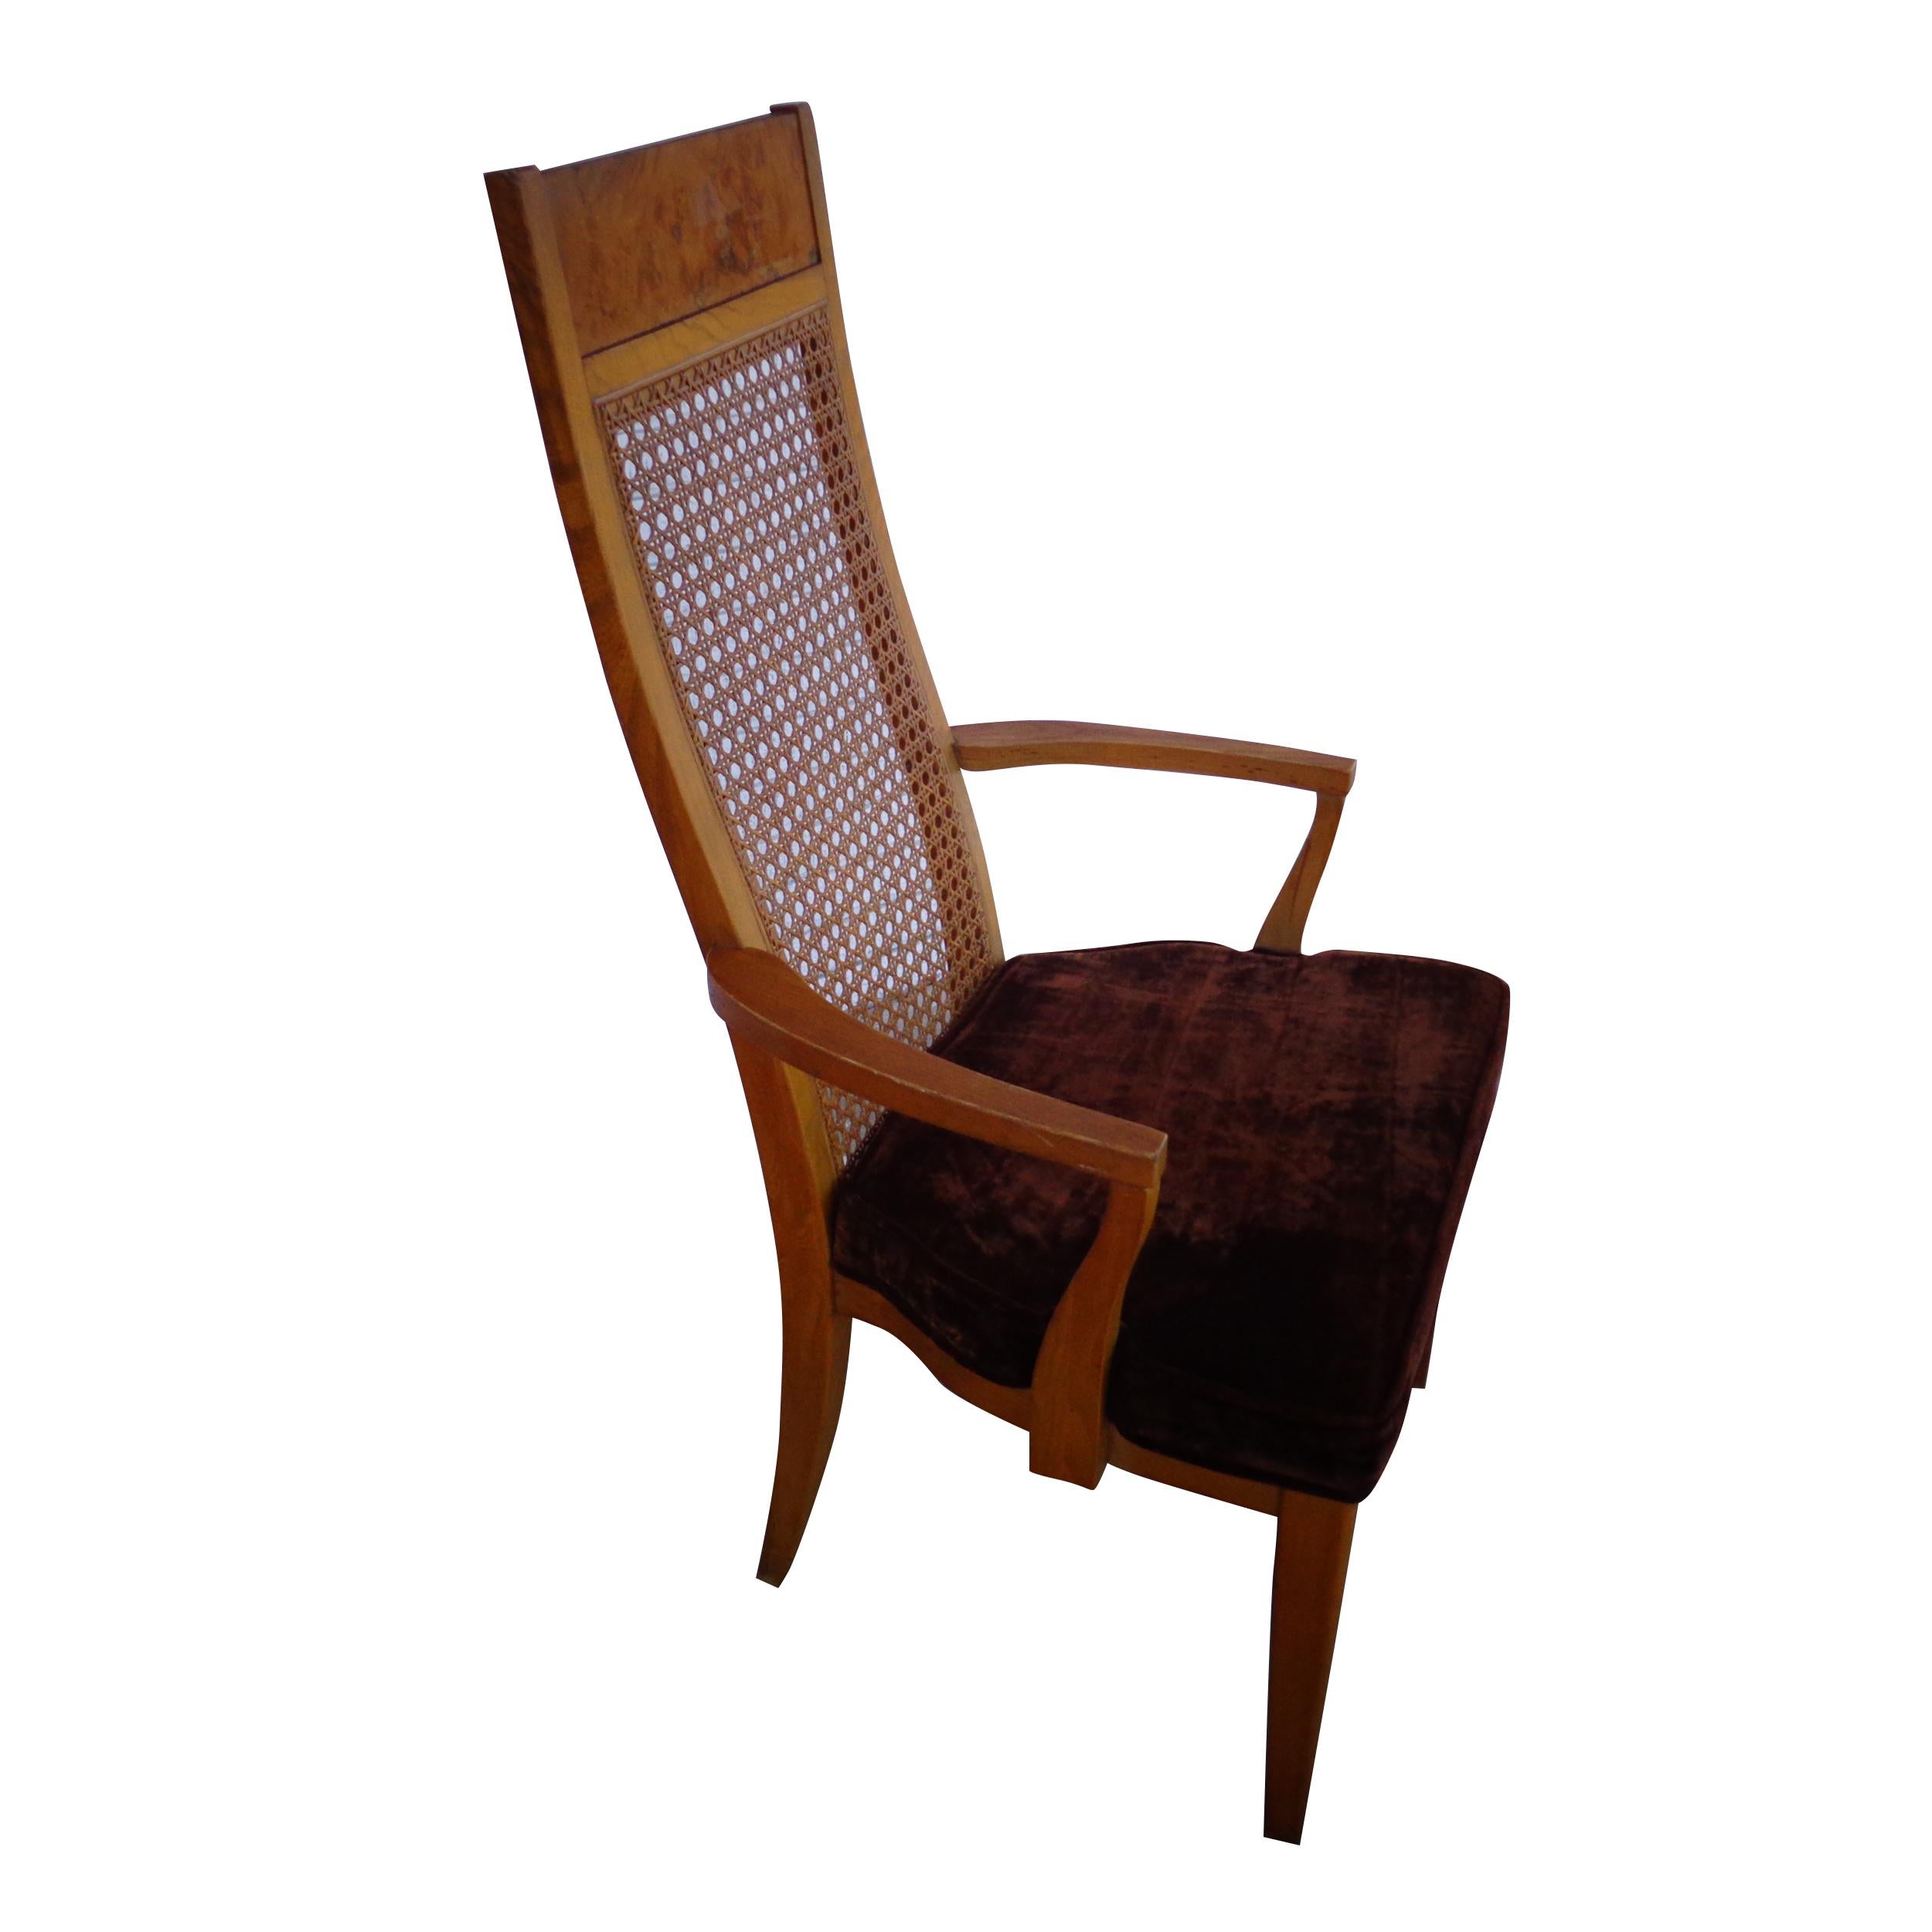 Oak (1) Lane High Back Cane Burl Dining Chairs  6 AVAILABLE For Sale